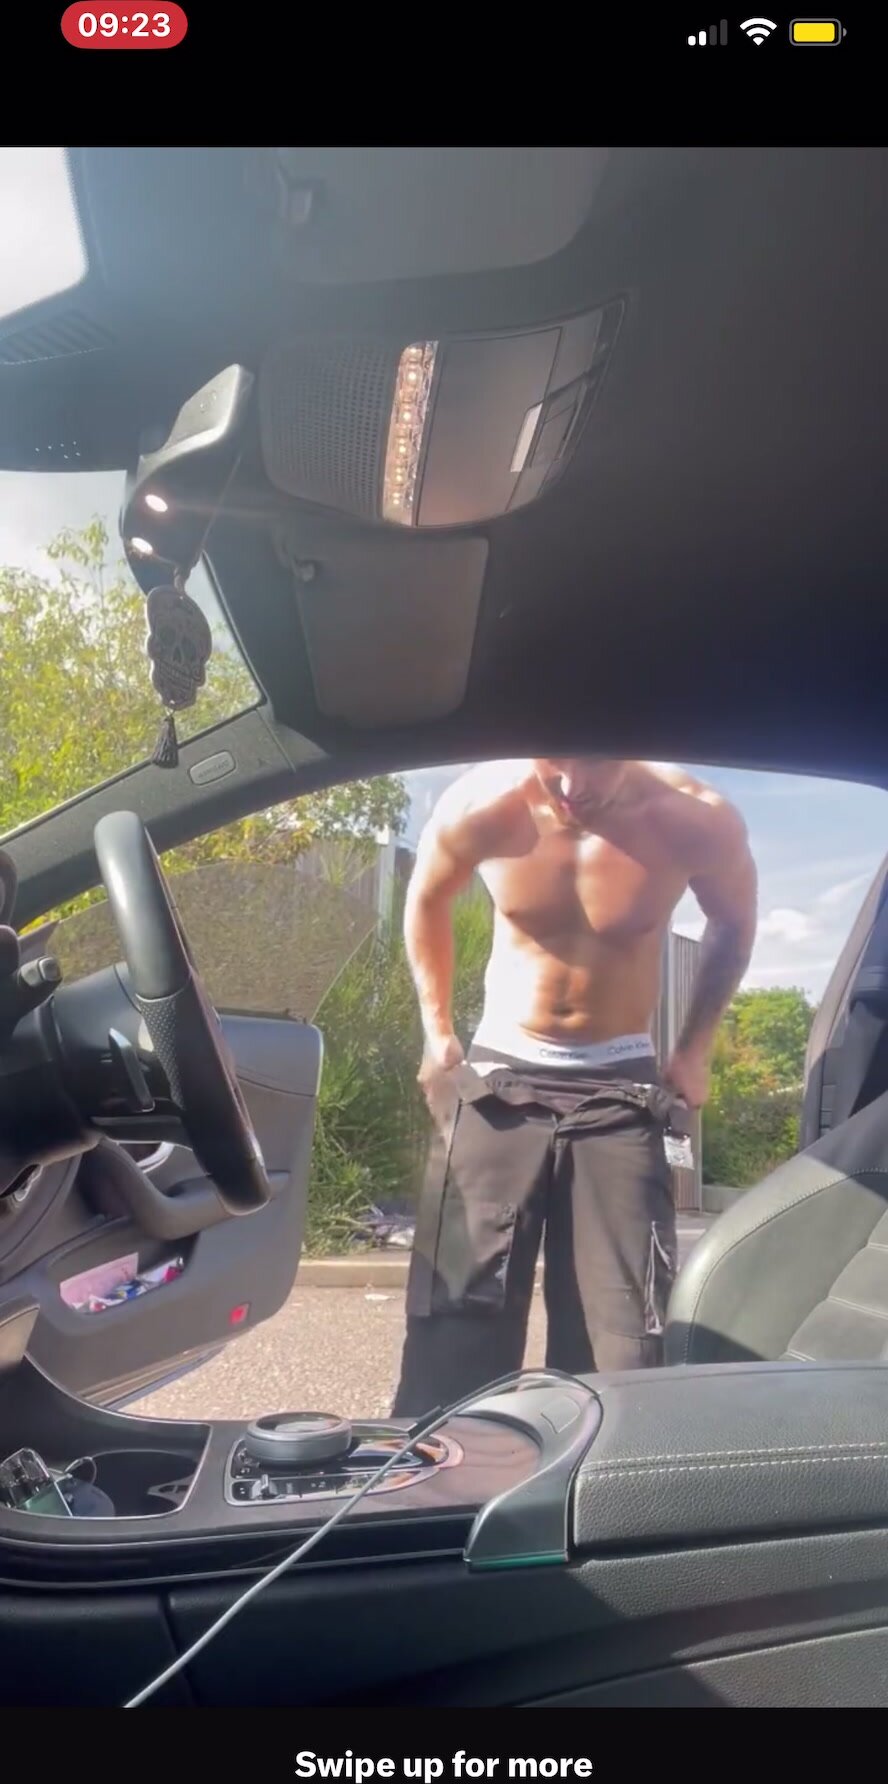 Hot English stripper gets naked outside car